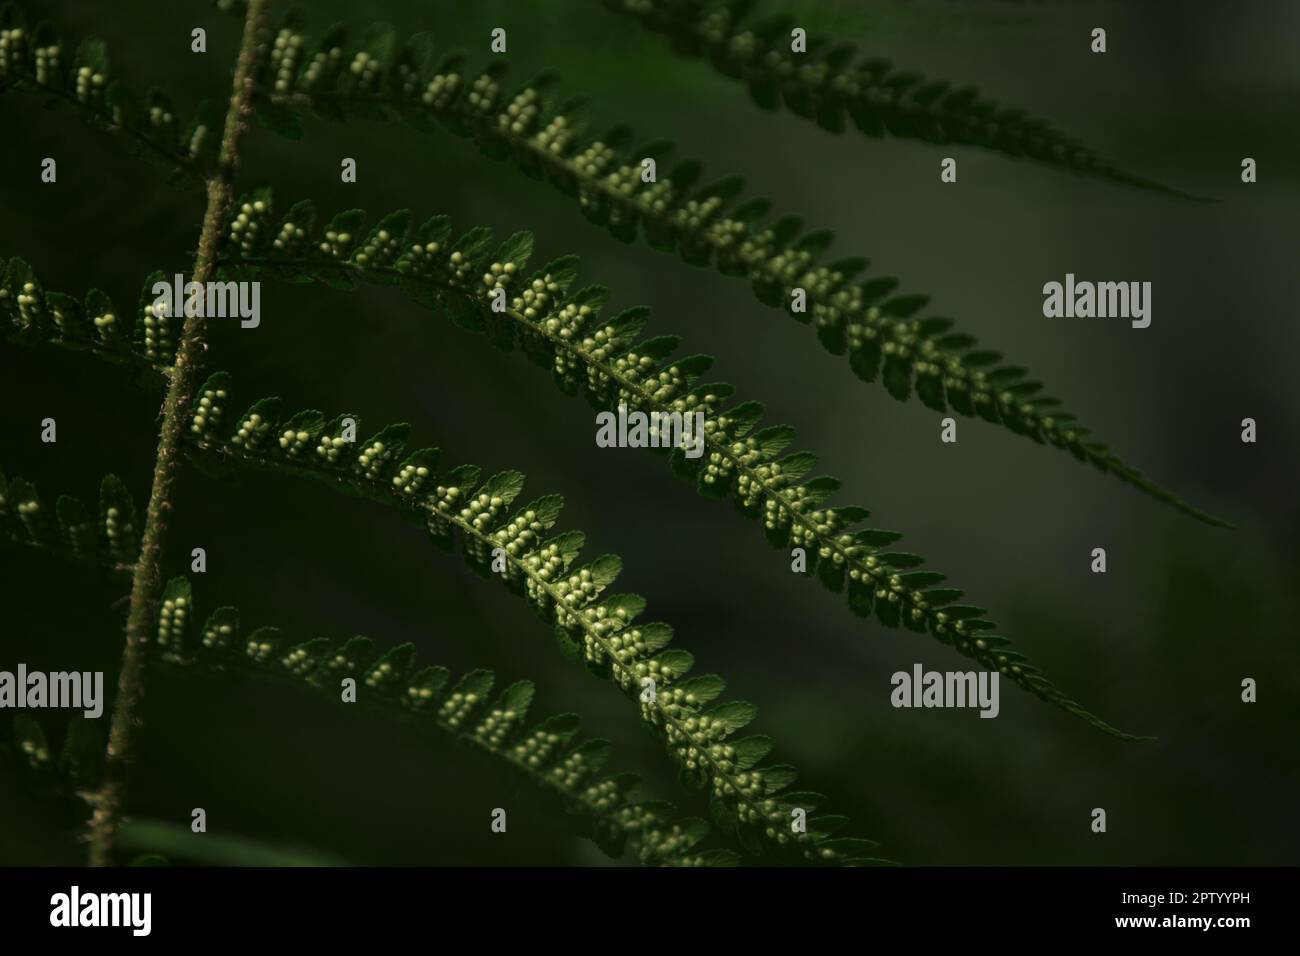 Fern leaf with seeds. Spores on the backside of the fronds Stock Photo